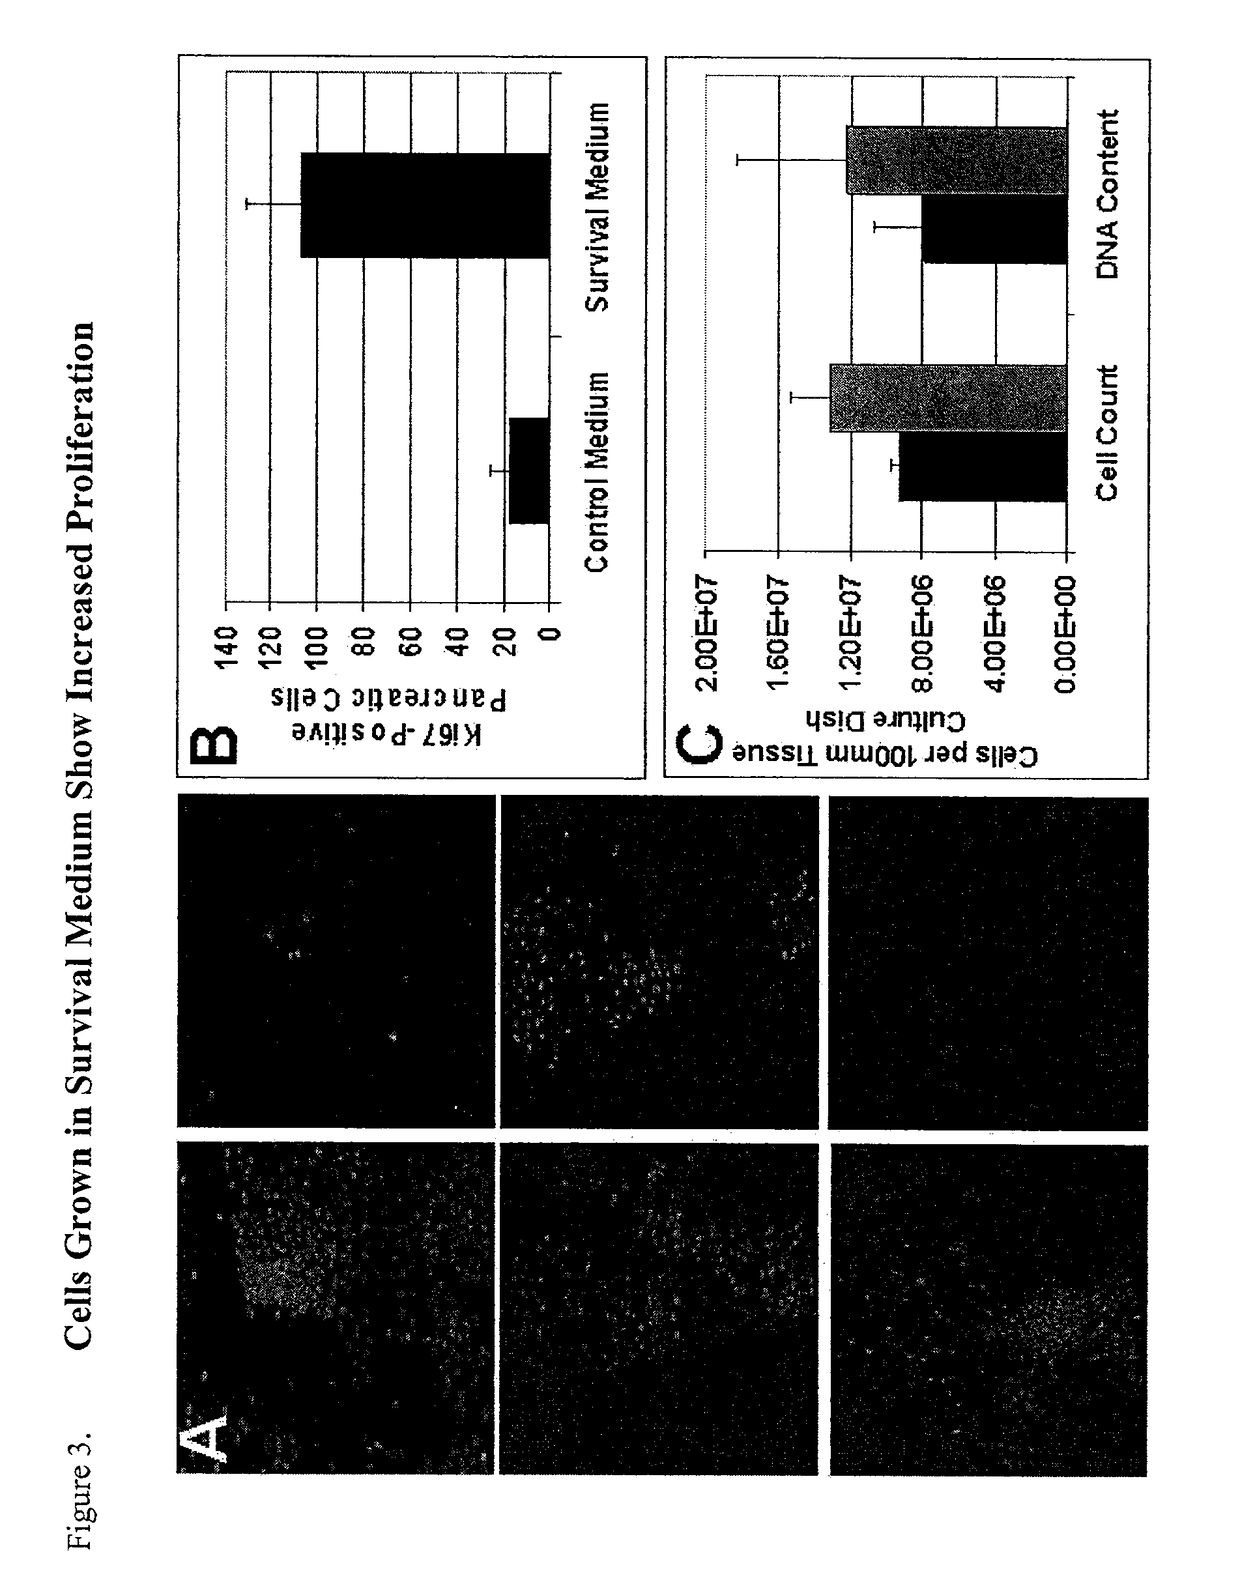 Method of improving cell proliferation of pancreatic progenitor cells in a pancreatic cell culture